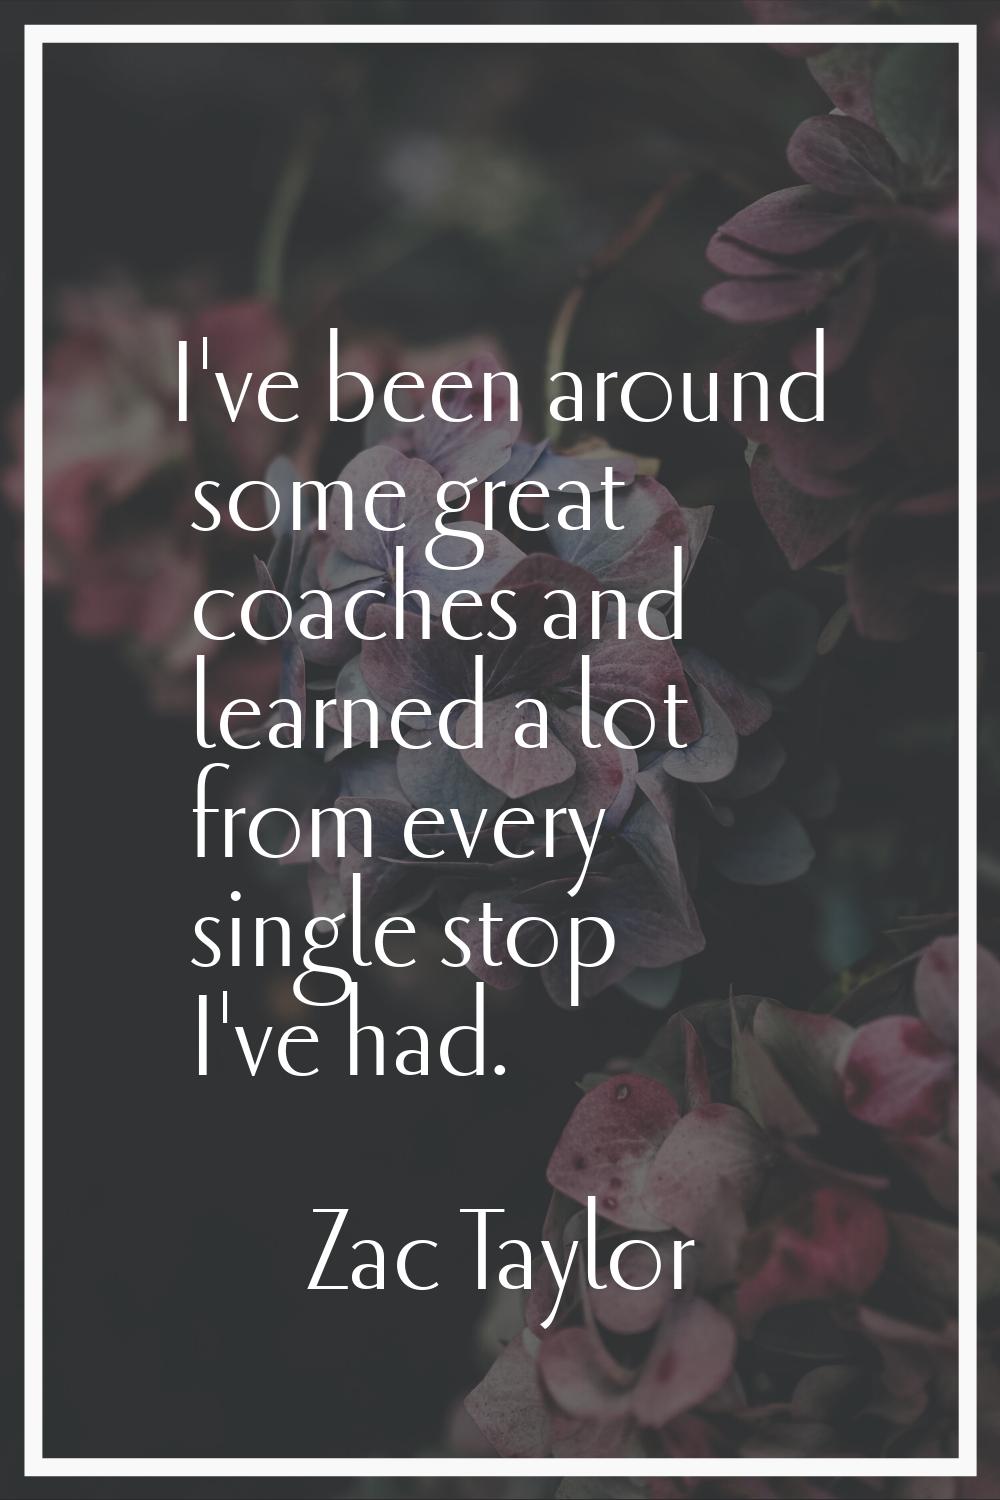 I've been around some great coaches and learned a lot from every single stop I've had.